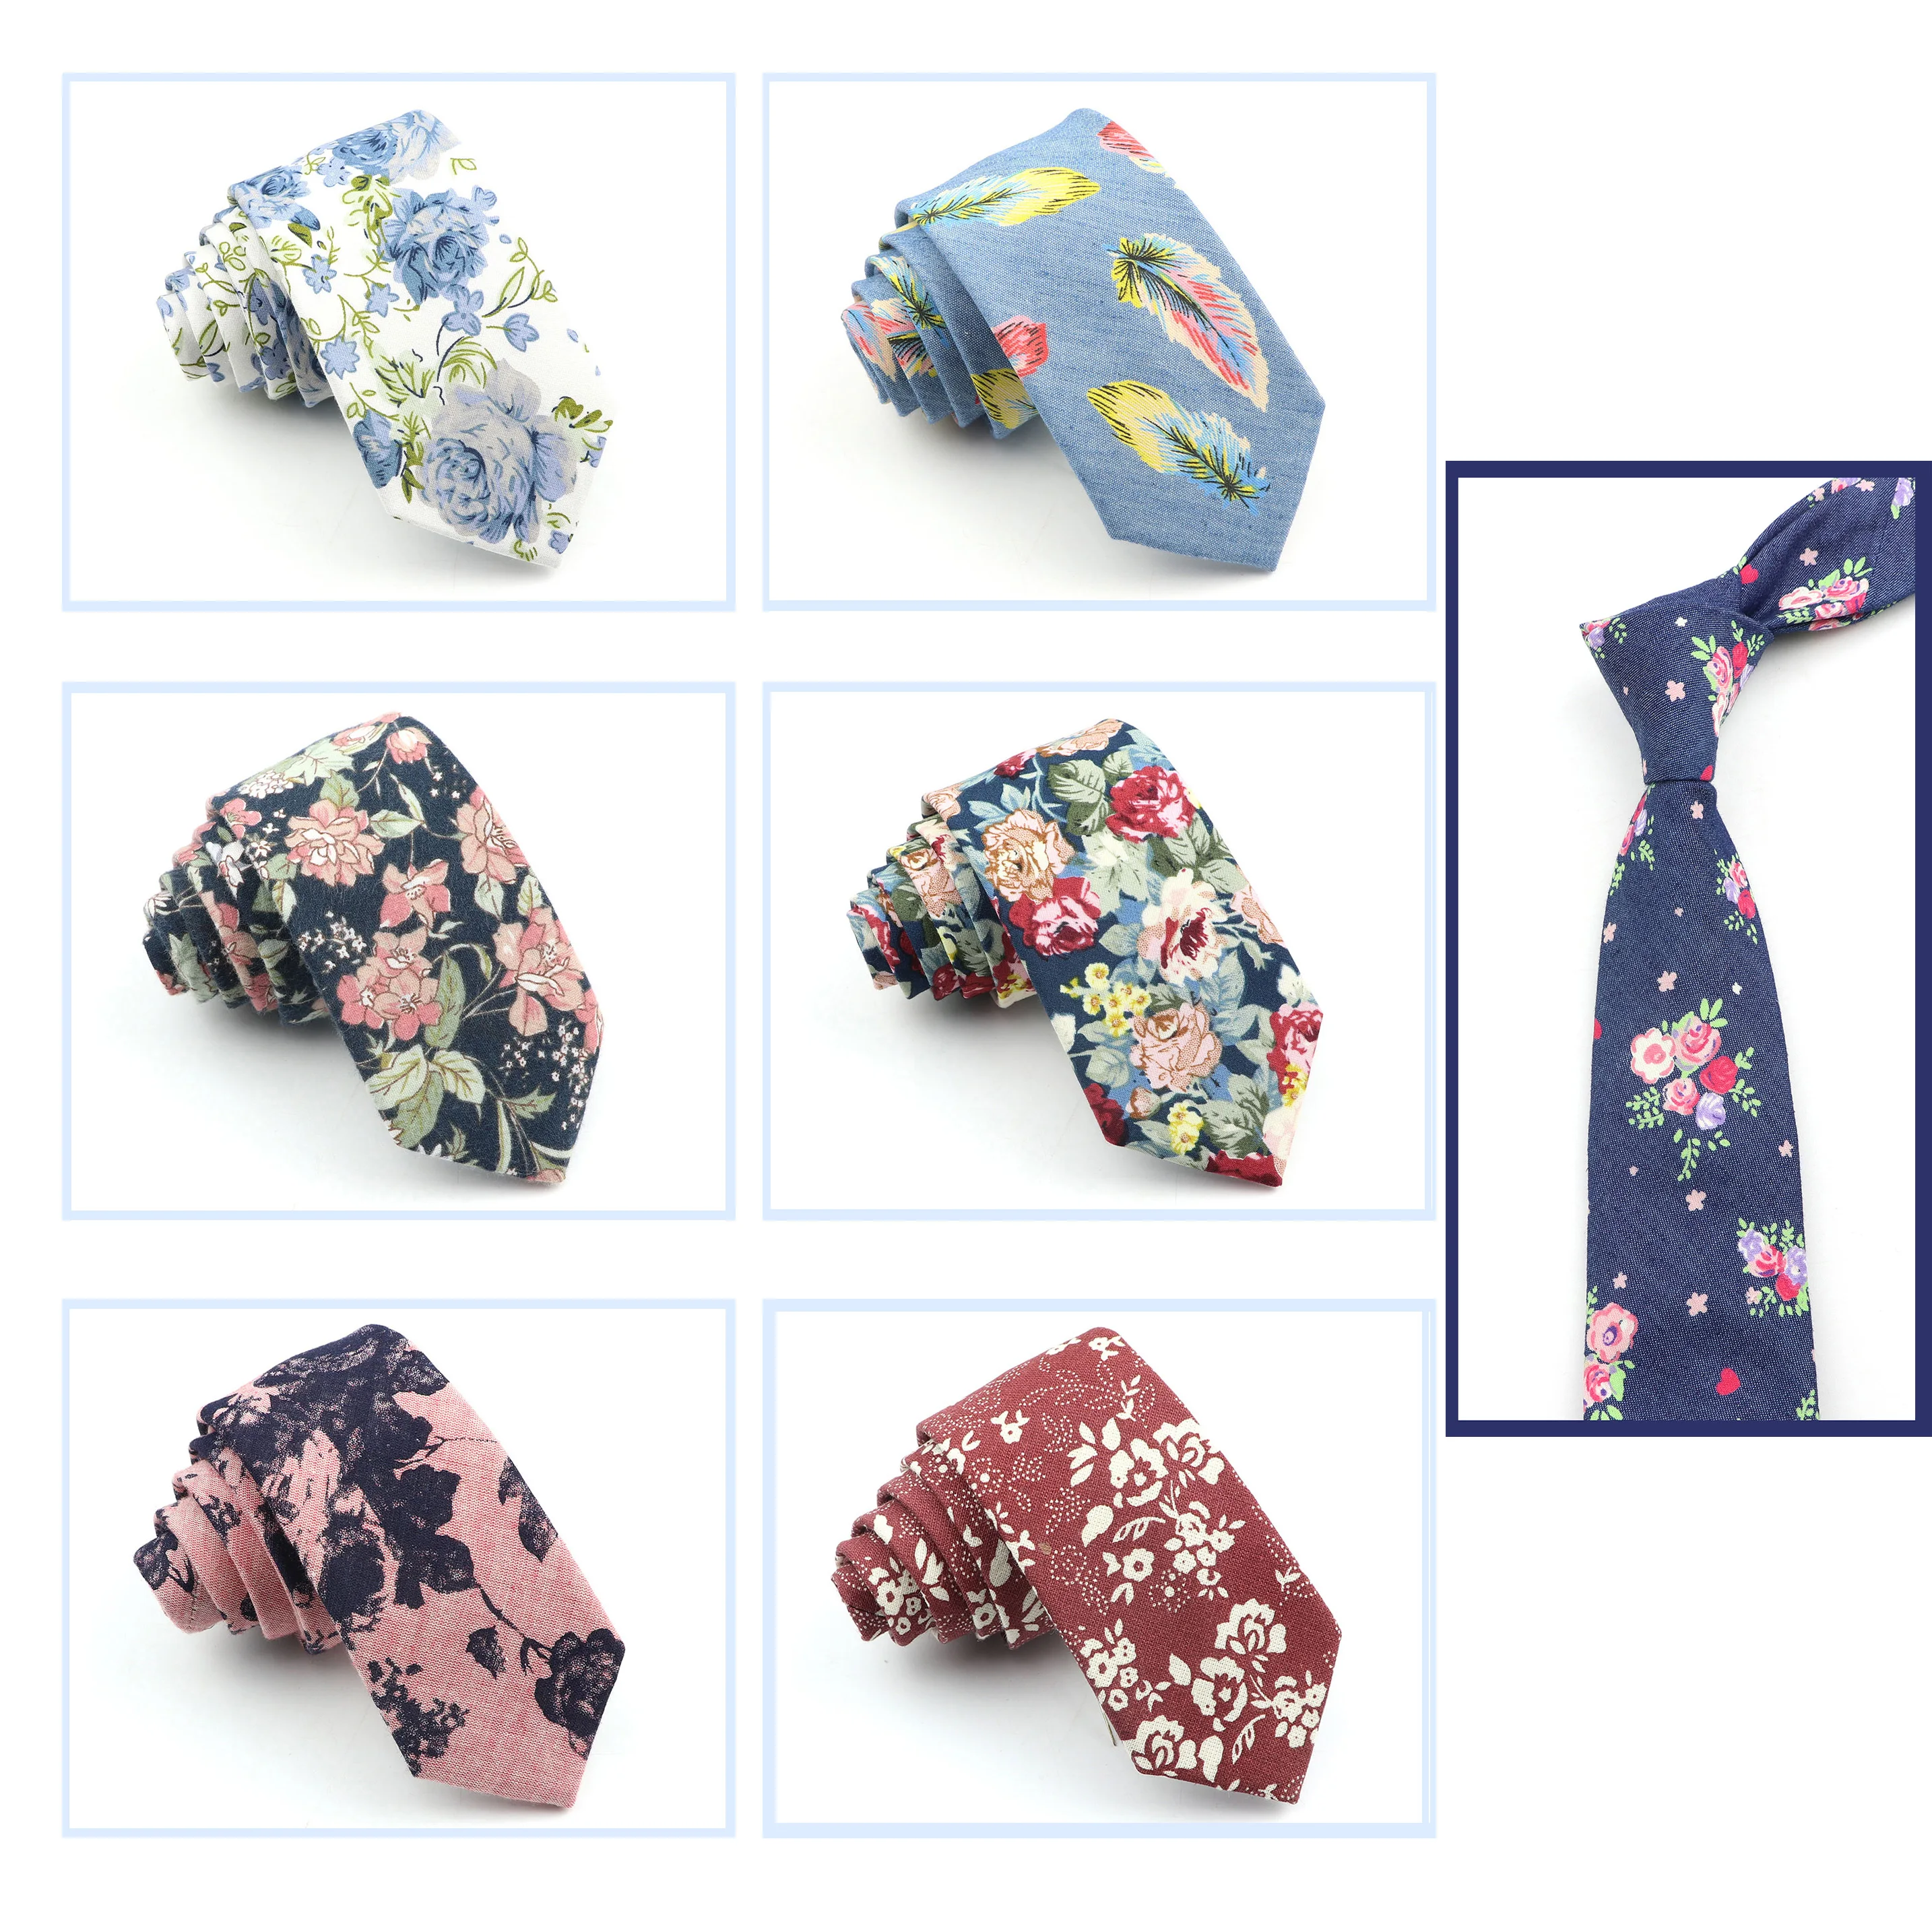 High Quality Men's Floral Ties Printed 100%Cotton 6.5cm Slim Neckties For Wedding Party Casual Skinny Gravata New Design Gift |